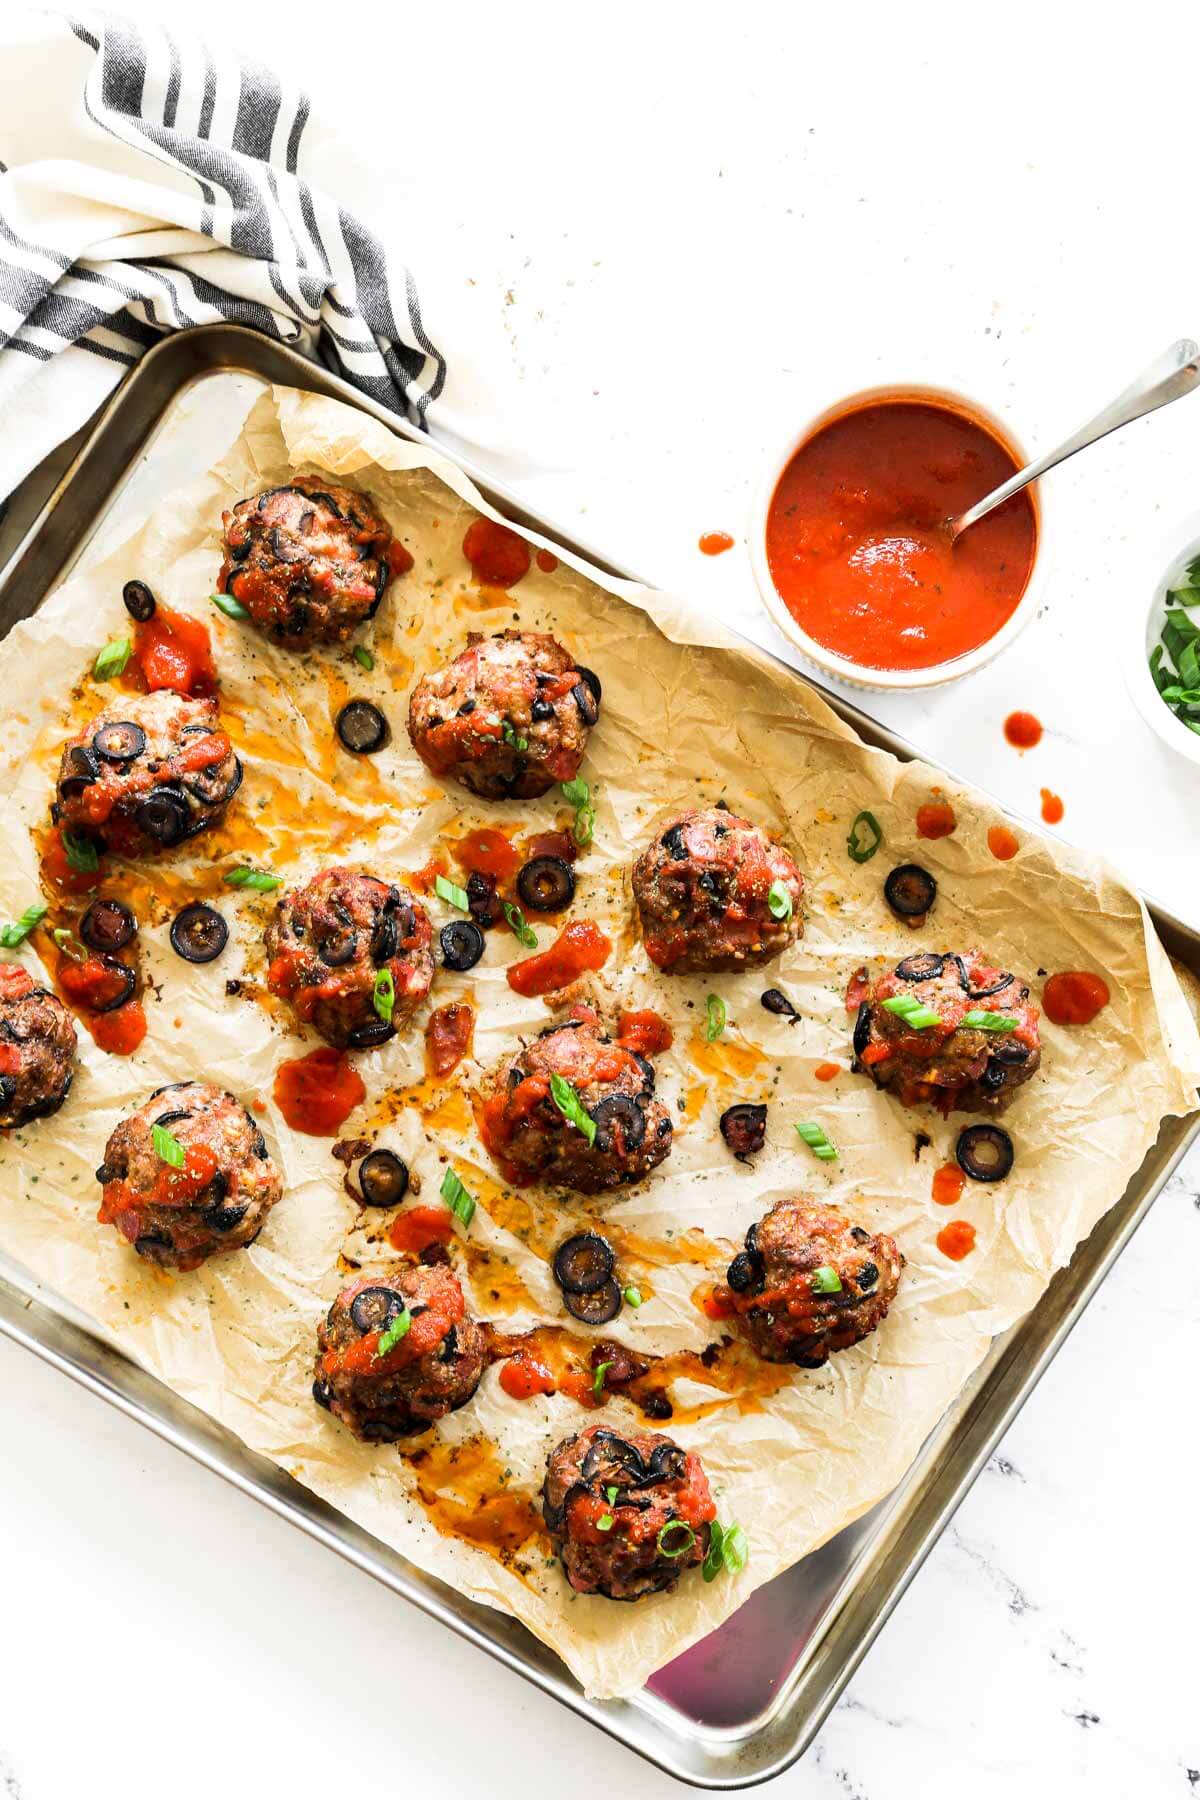 Overhead image of a sheet pan with pizza meatballs and marinara sauce on the sauce. Meatballs are drizzled with marinara sauce on top and sprinkled with chopped green onion.